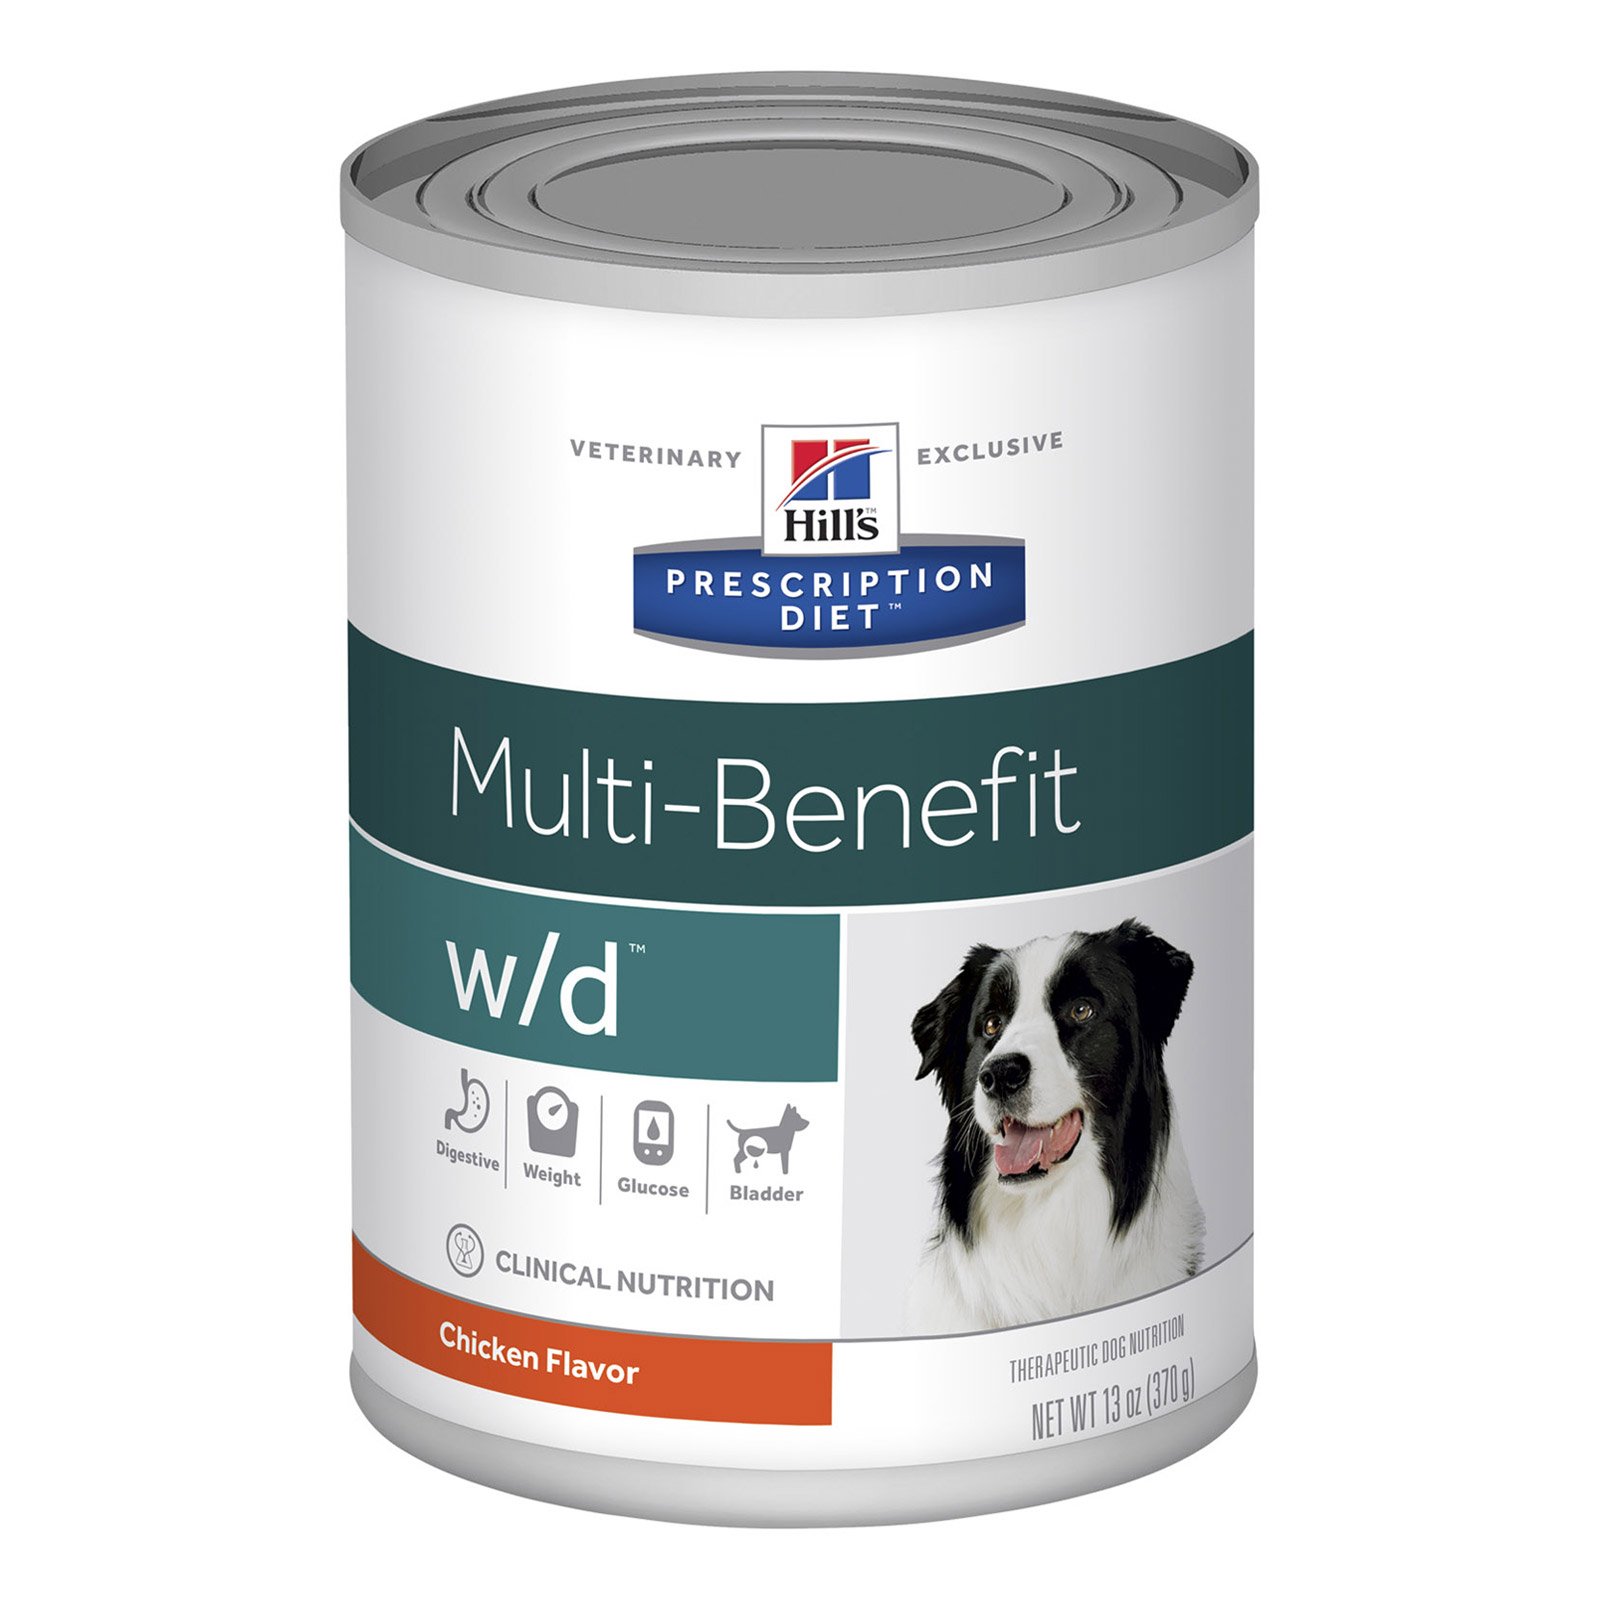 Hill's Prescription Diet W/D Digestive/Weight/Glucose Management Canned Dog Food 370 Gm 12 Cans